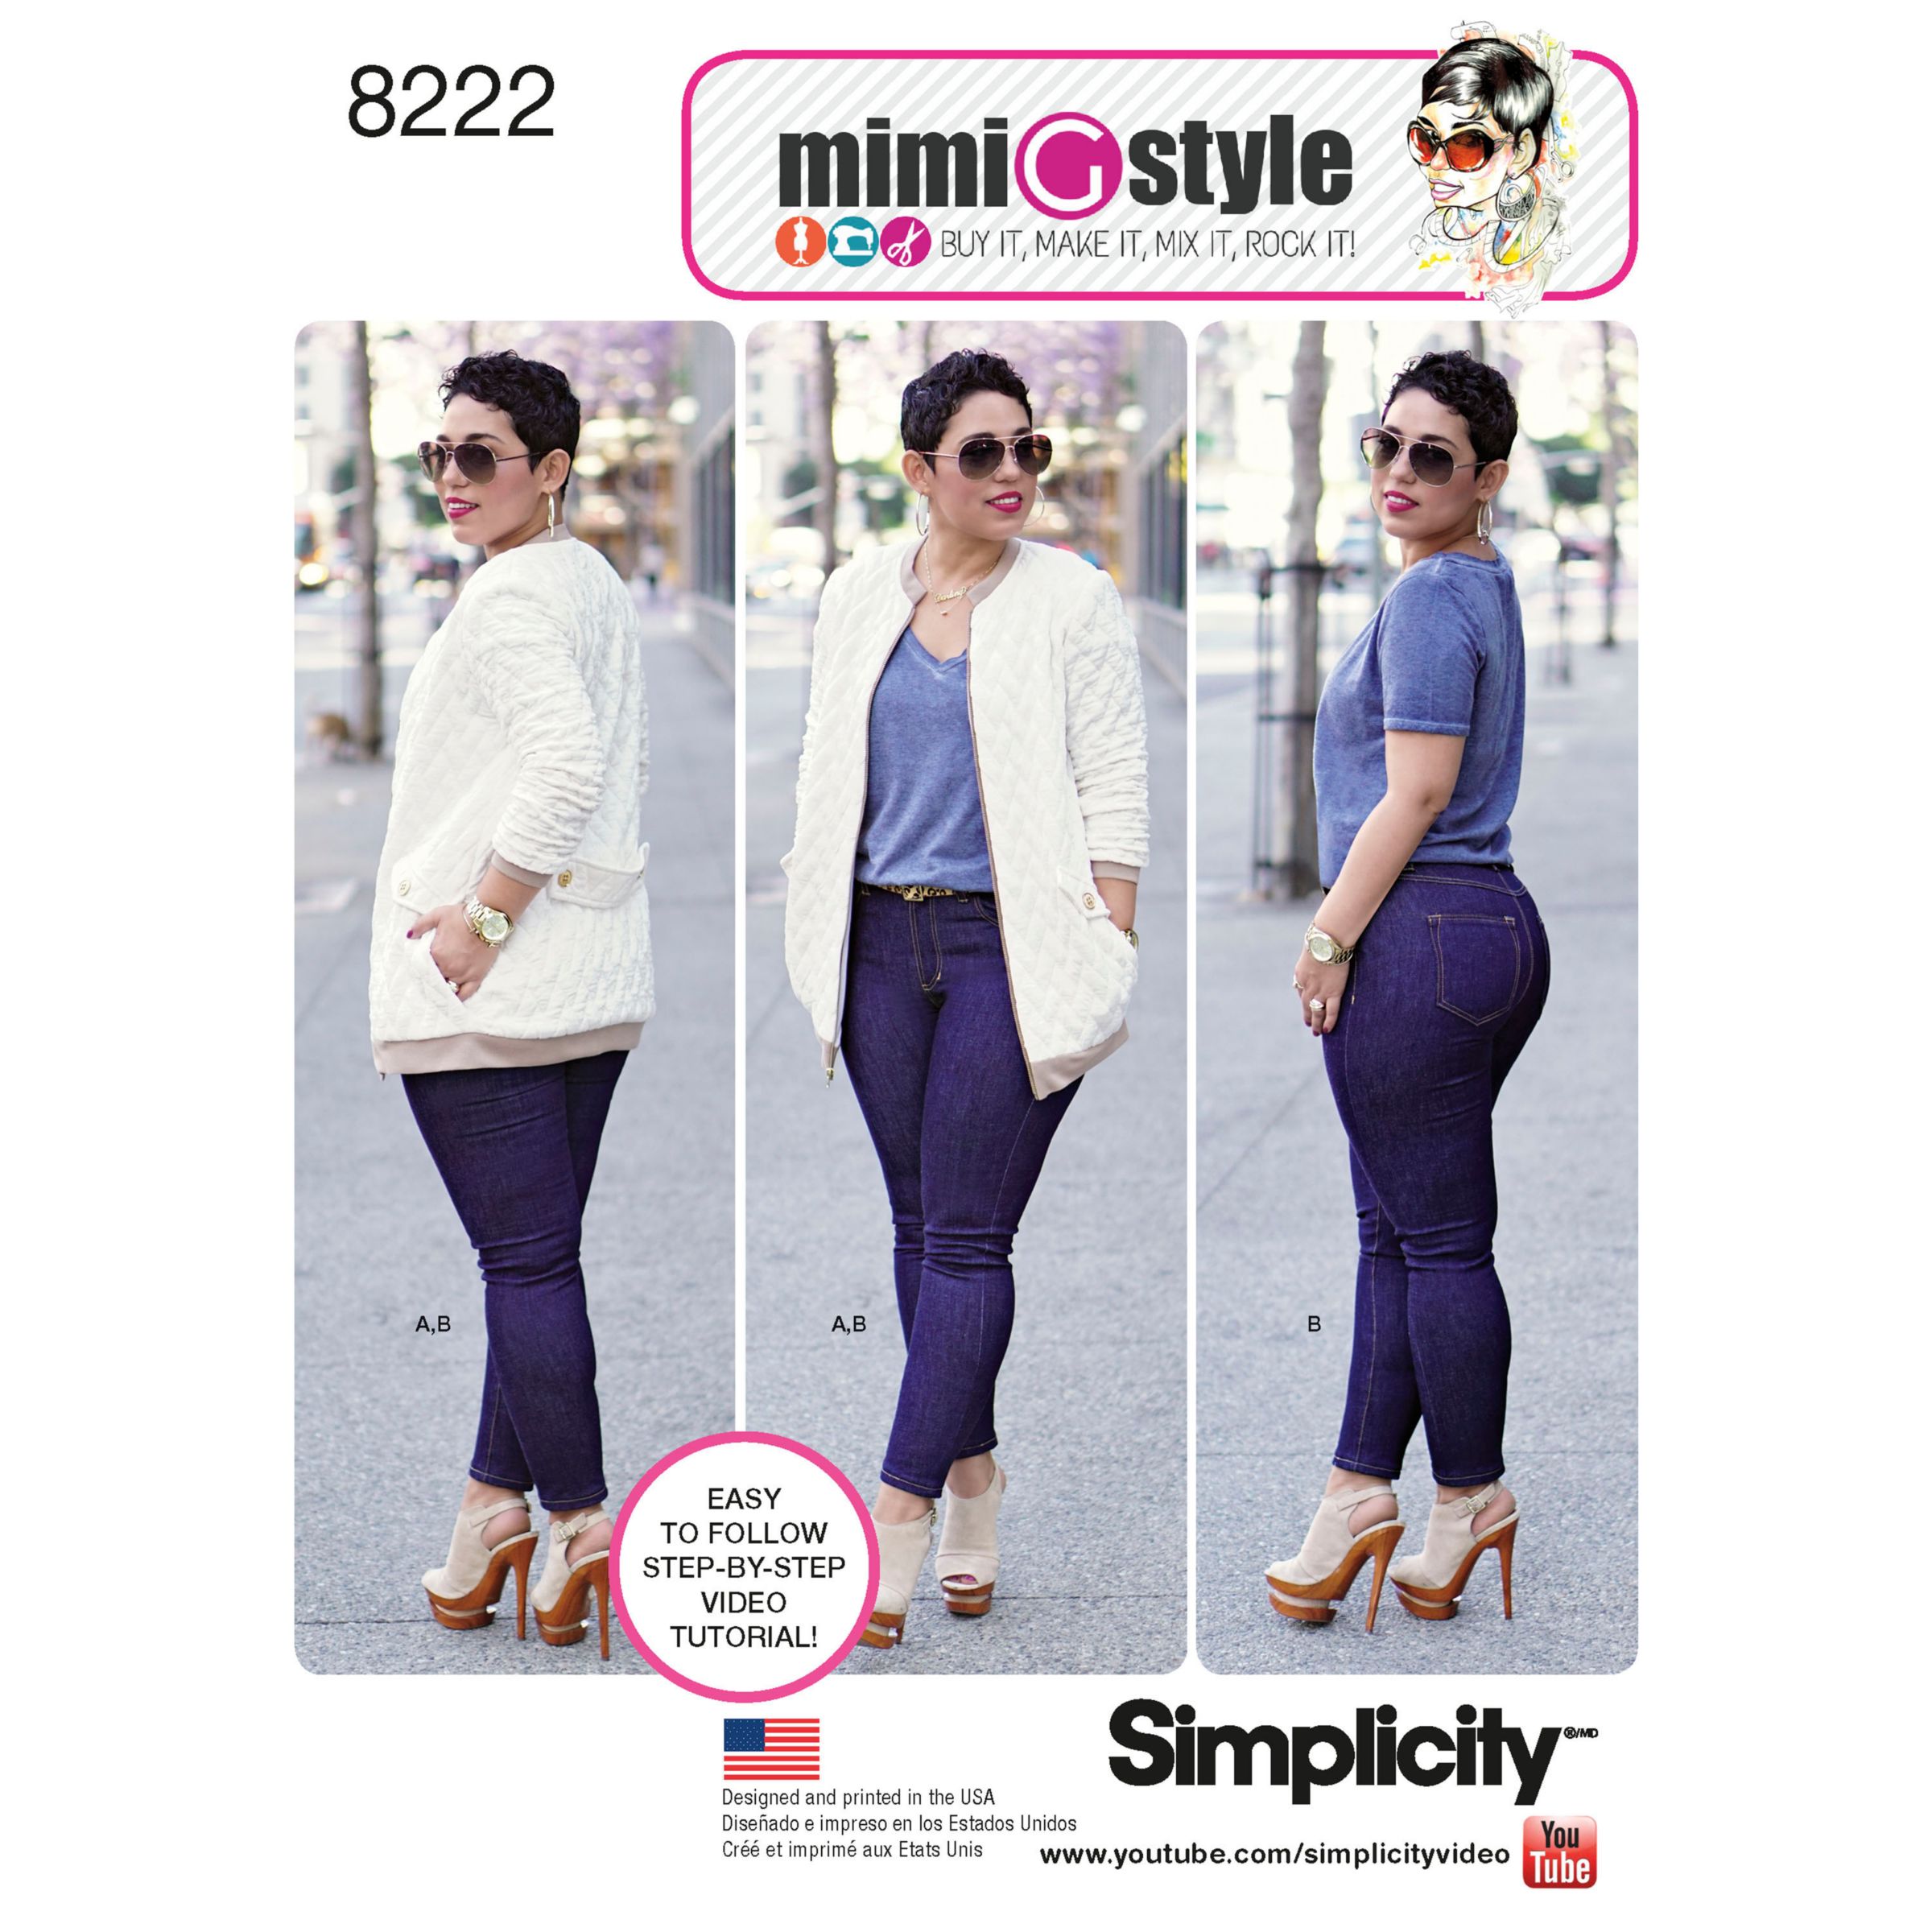 Simplicity Mimi G Style Women's Jacket and Jeans Sewing Pattern, 8222